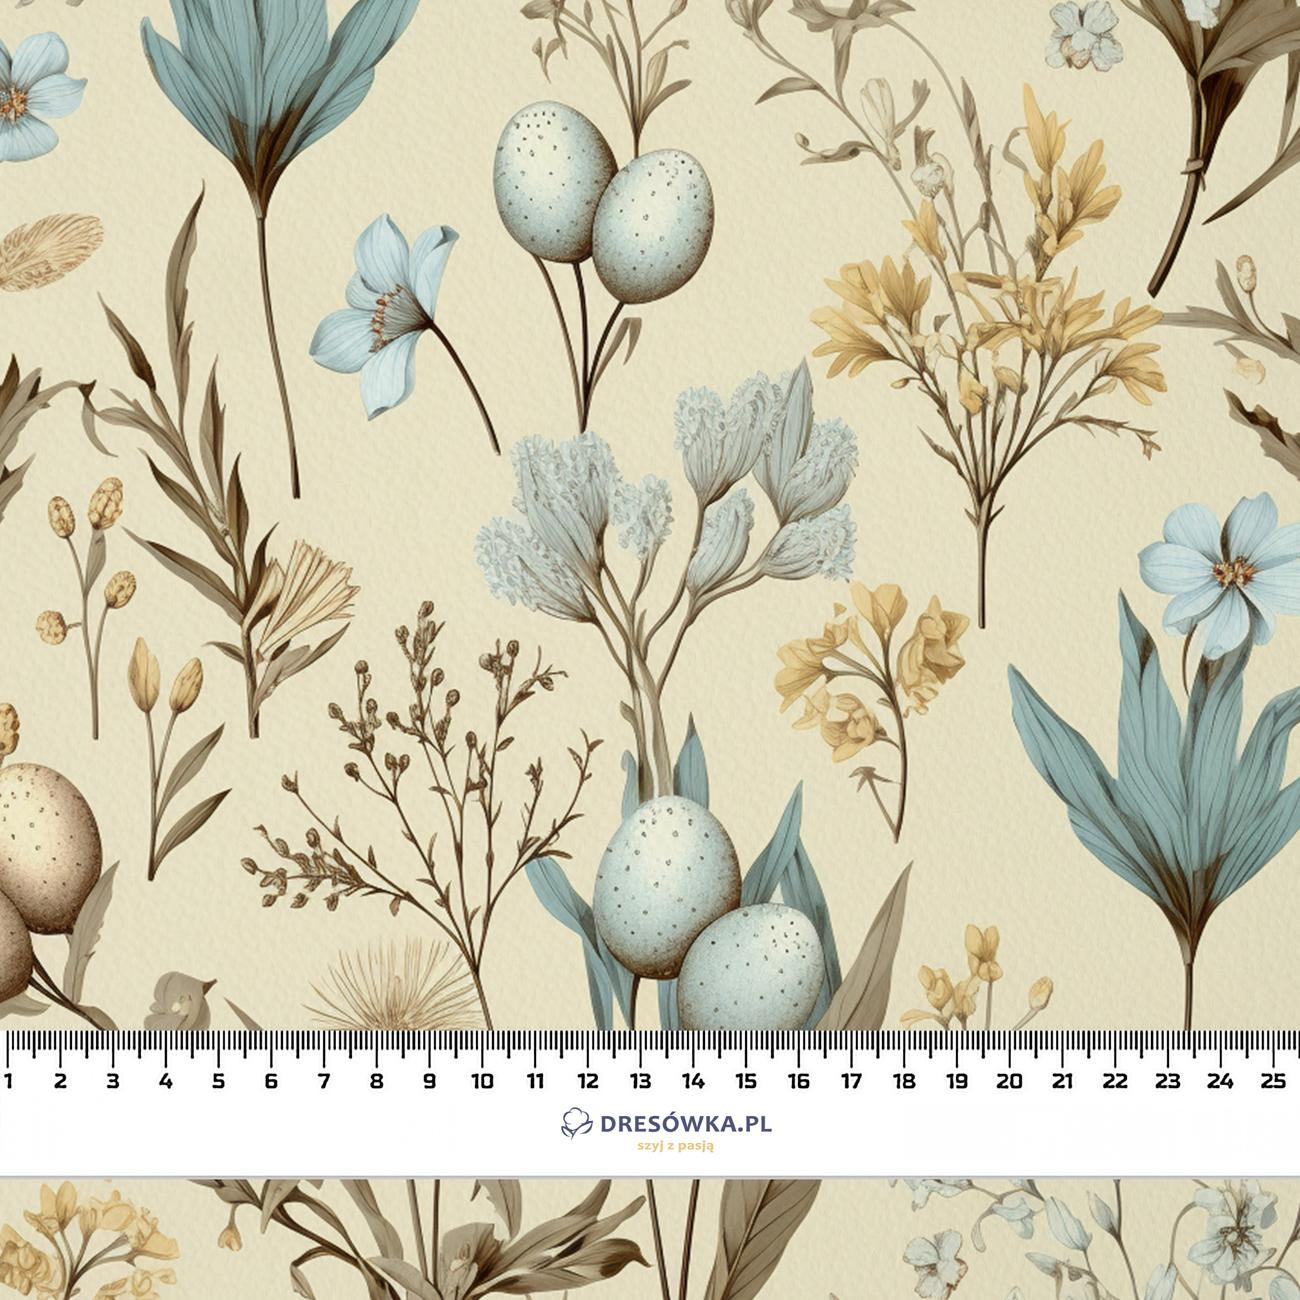 SPRING FLOWERS PAT. 4 - looped knit fabric